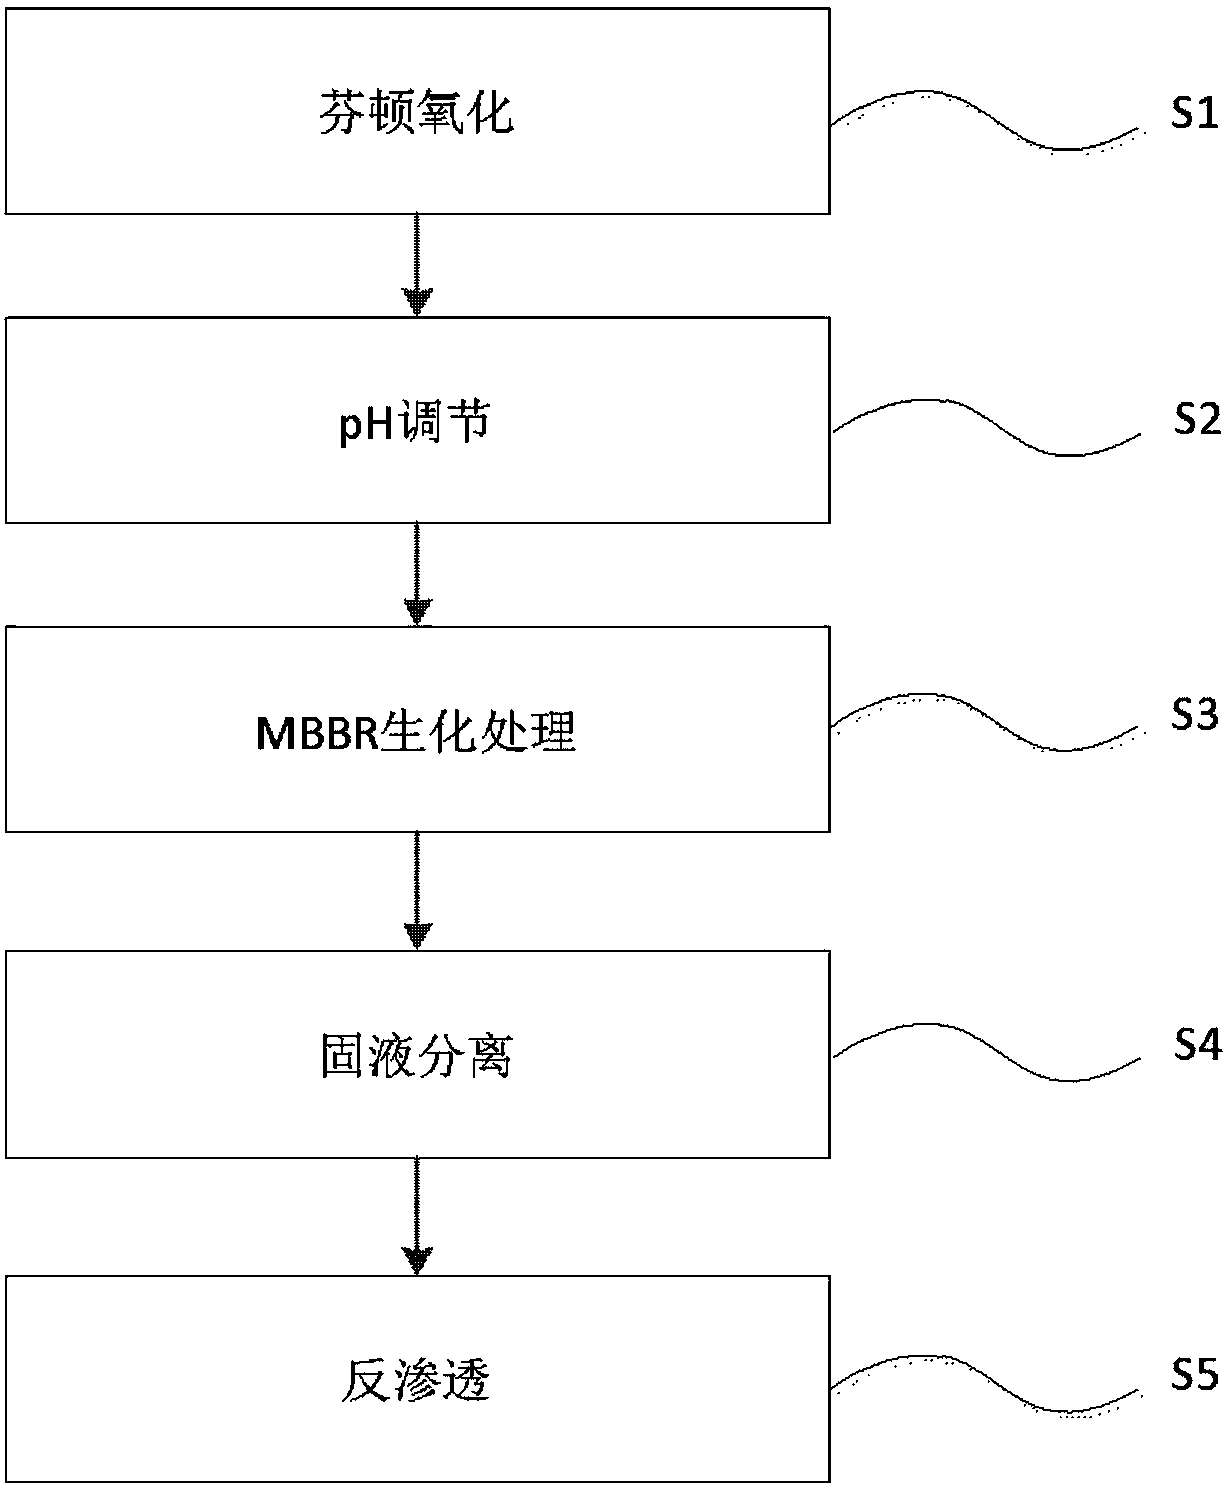 Method for treating wastewater